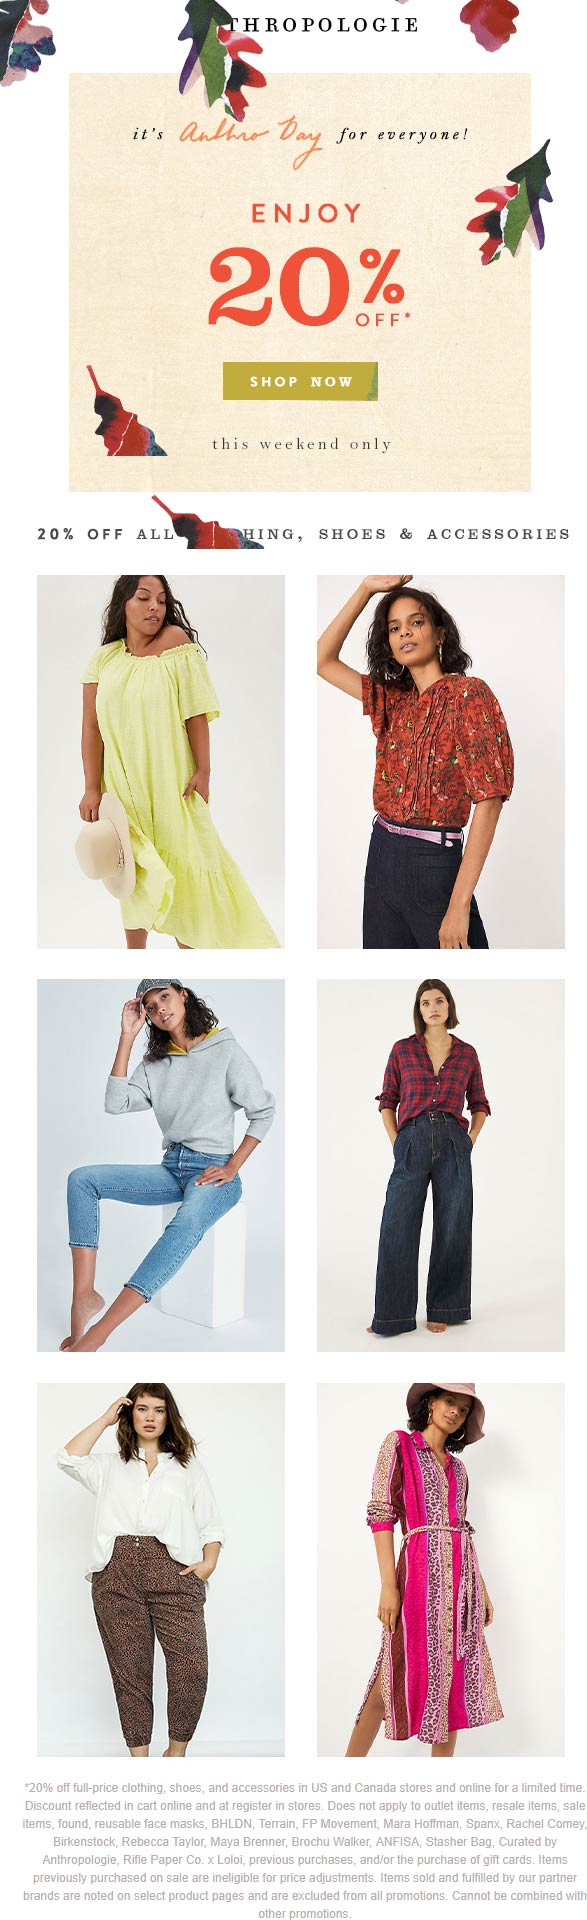 october-2020-20-off-at-anthropologie-ditto-online-anthropologie